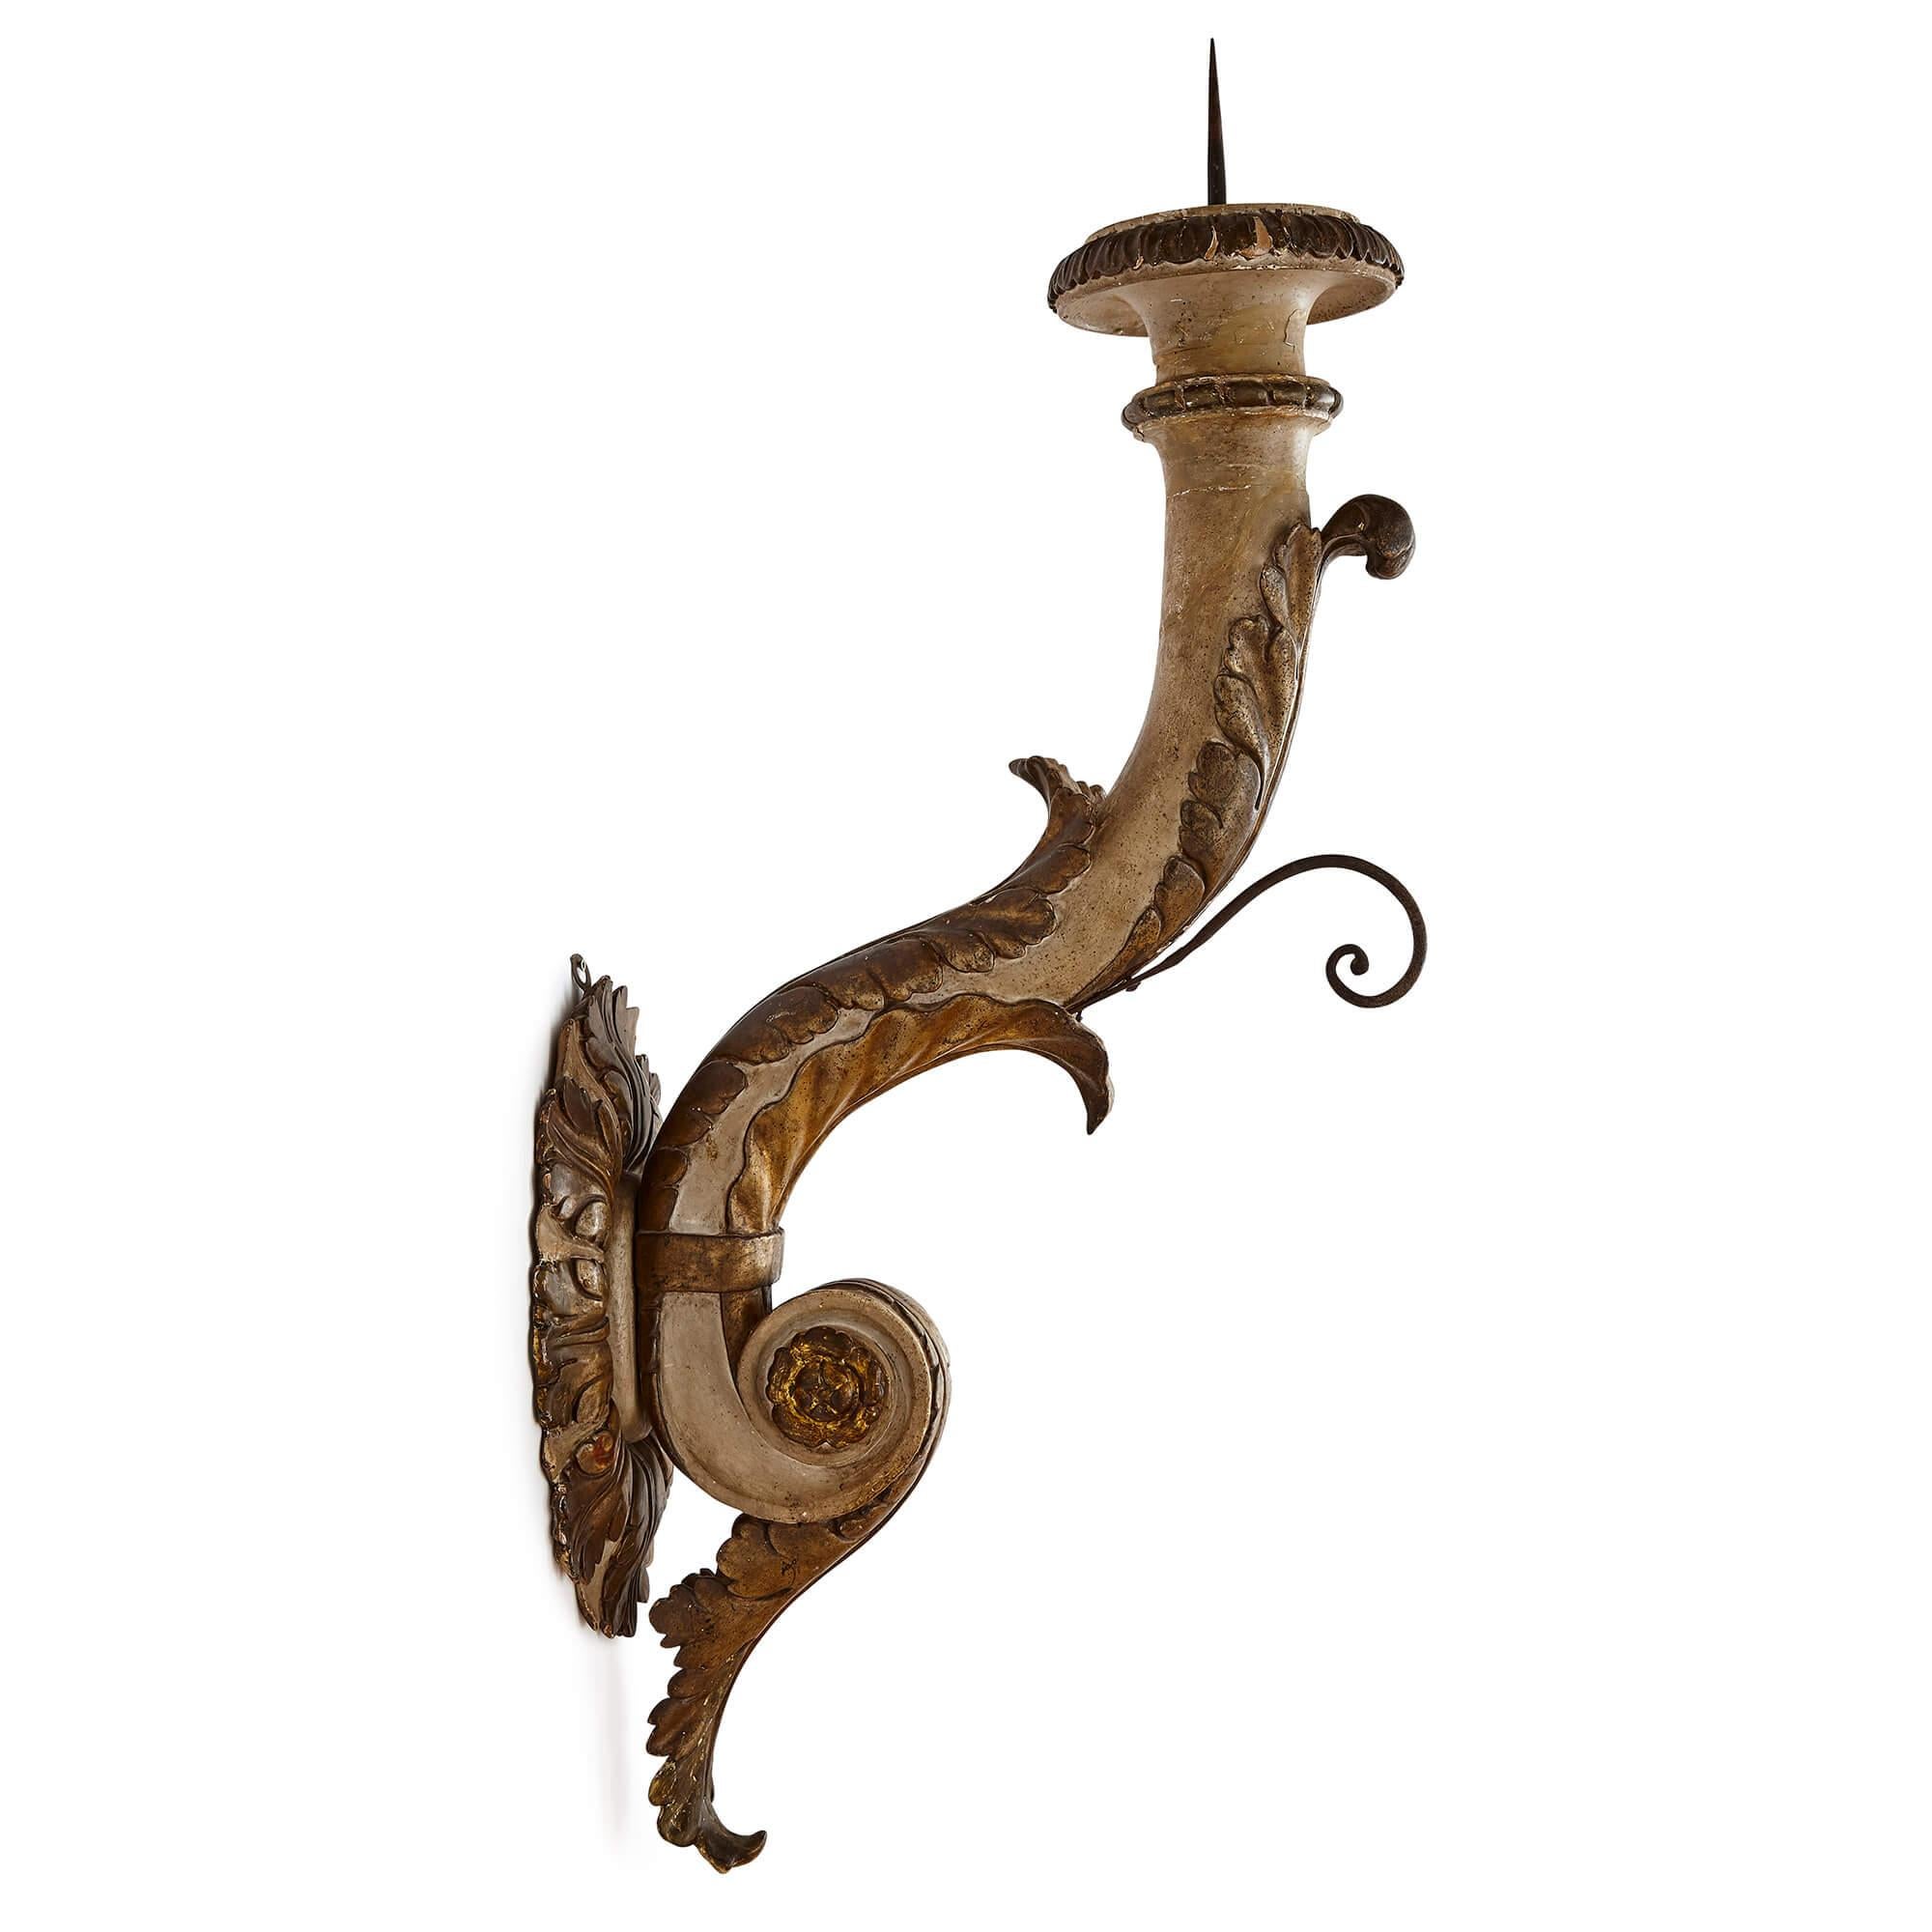 Pair of large Italian Baroque style carved giltwood sconces
Italian, early 20th Century
Height 92cm, width 26cm, depth 48cm

This elegant pair of sconces is crafted from carved wood that has been painted and gilt. The sconces are in the Baroque